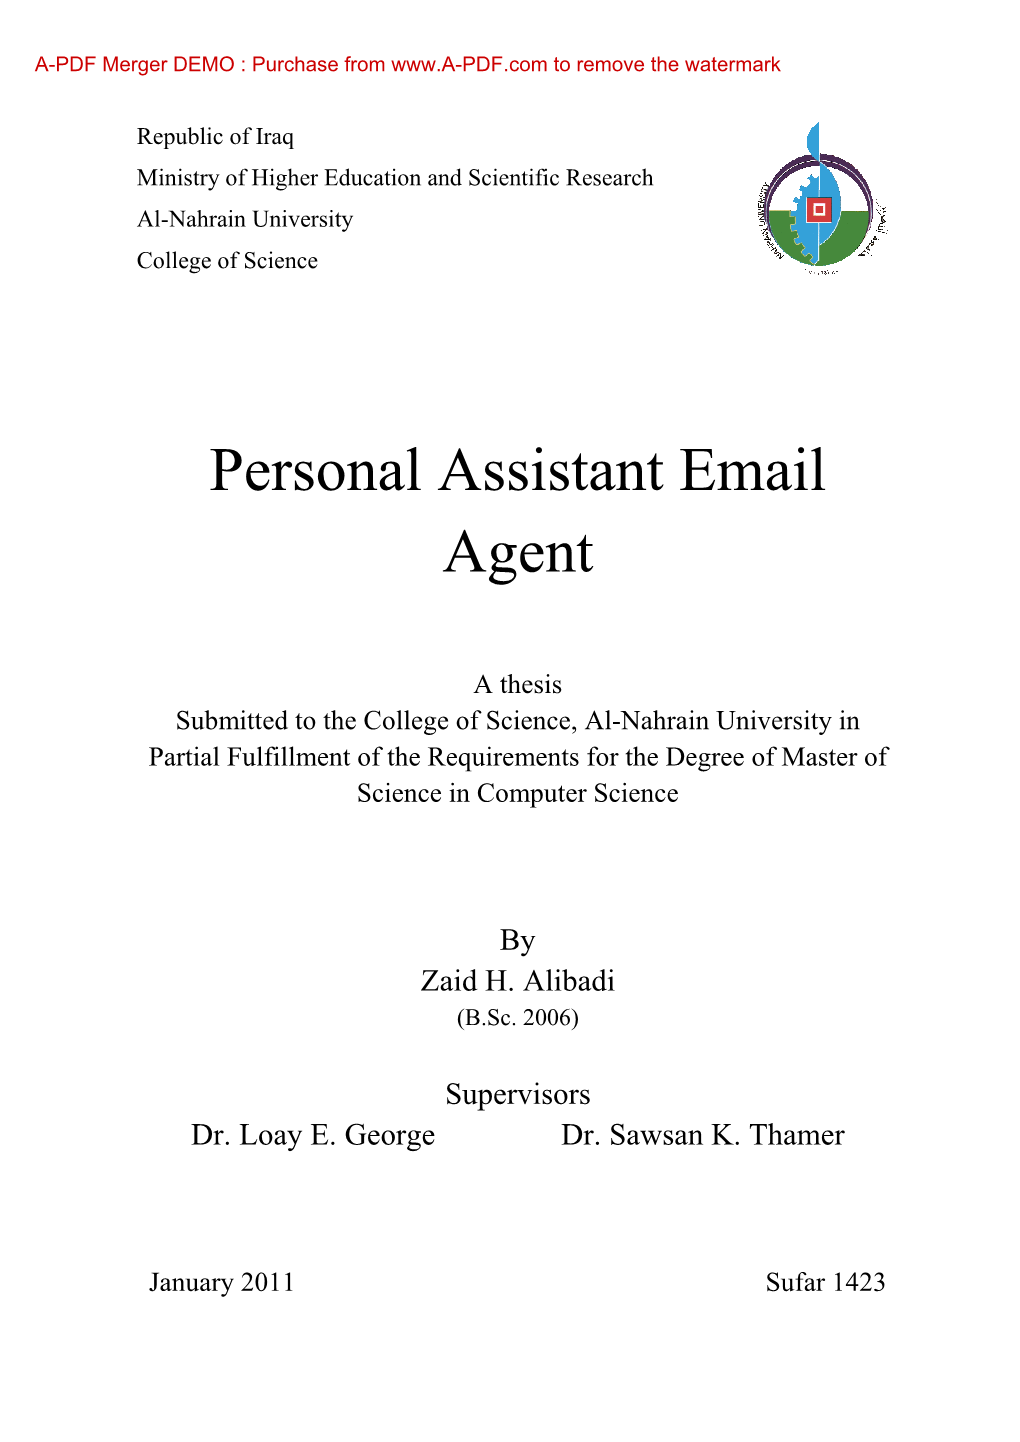 Personal Assistant Email Agent